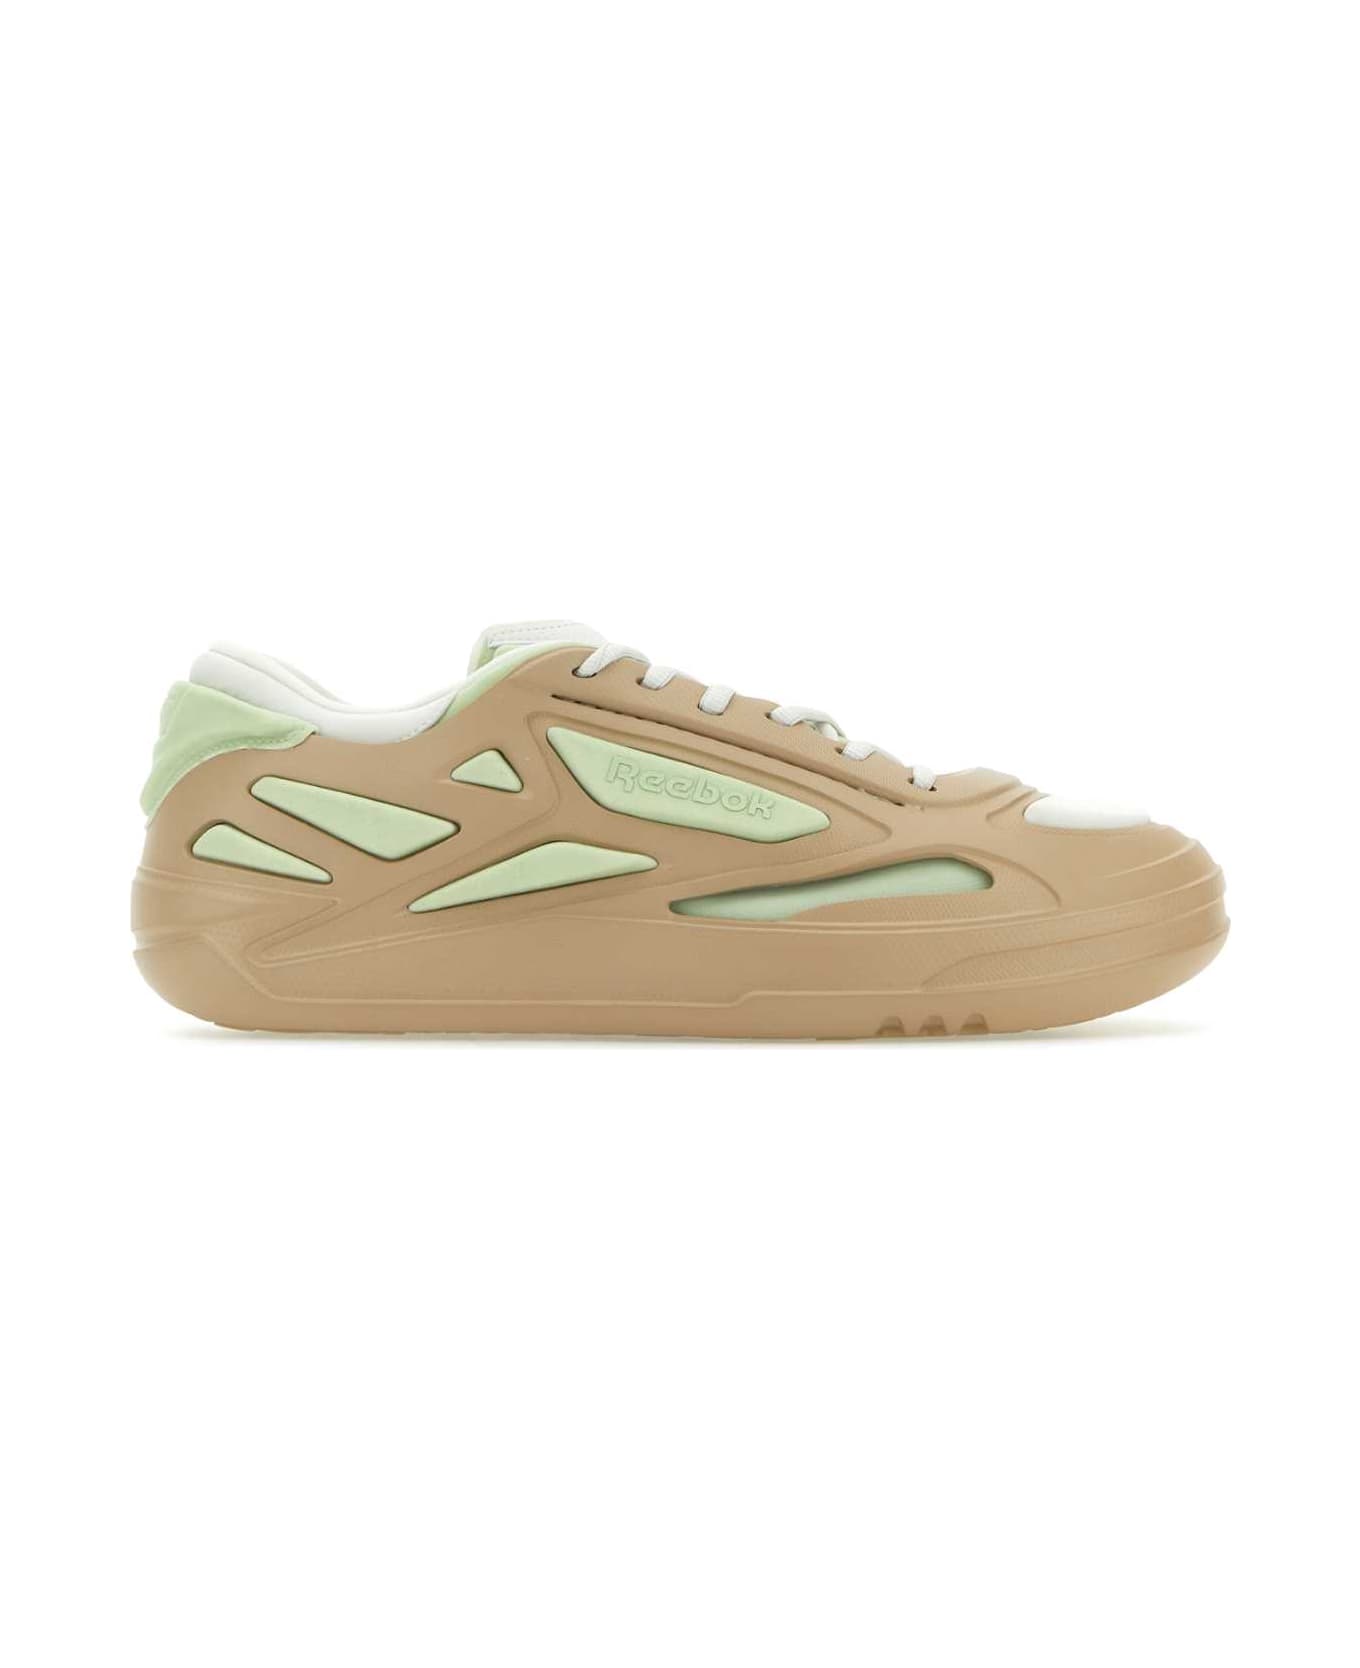 Reebok Multicolor Fabric And Rubber Future Club C Sneakers - BEIGELIG